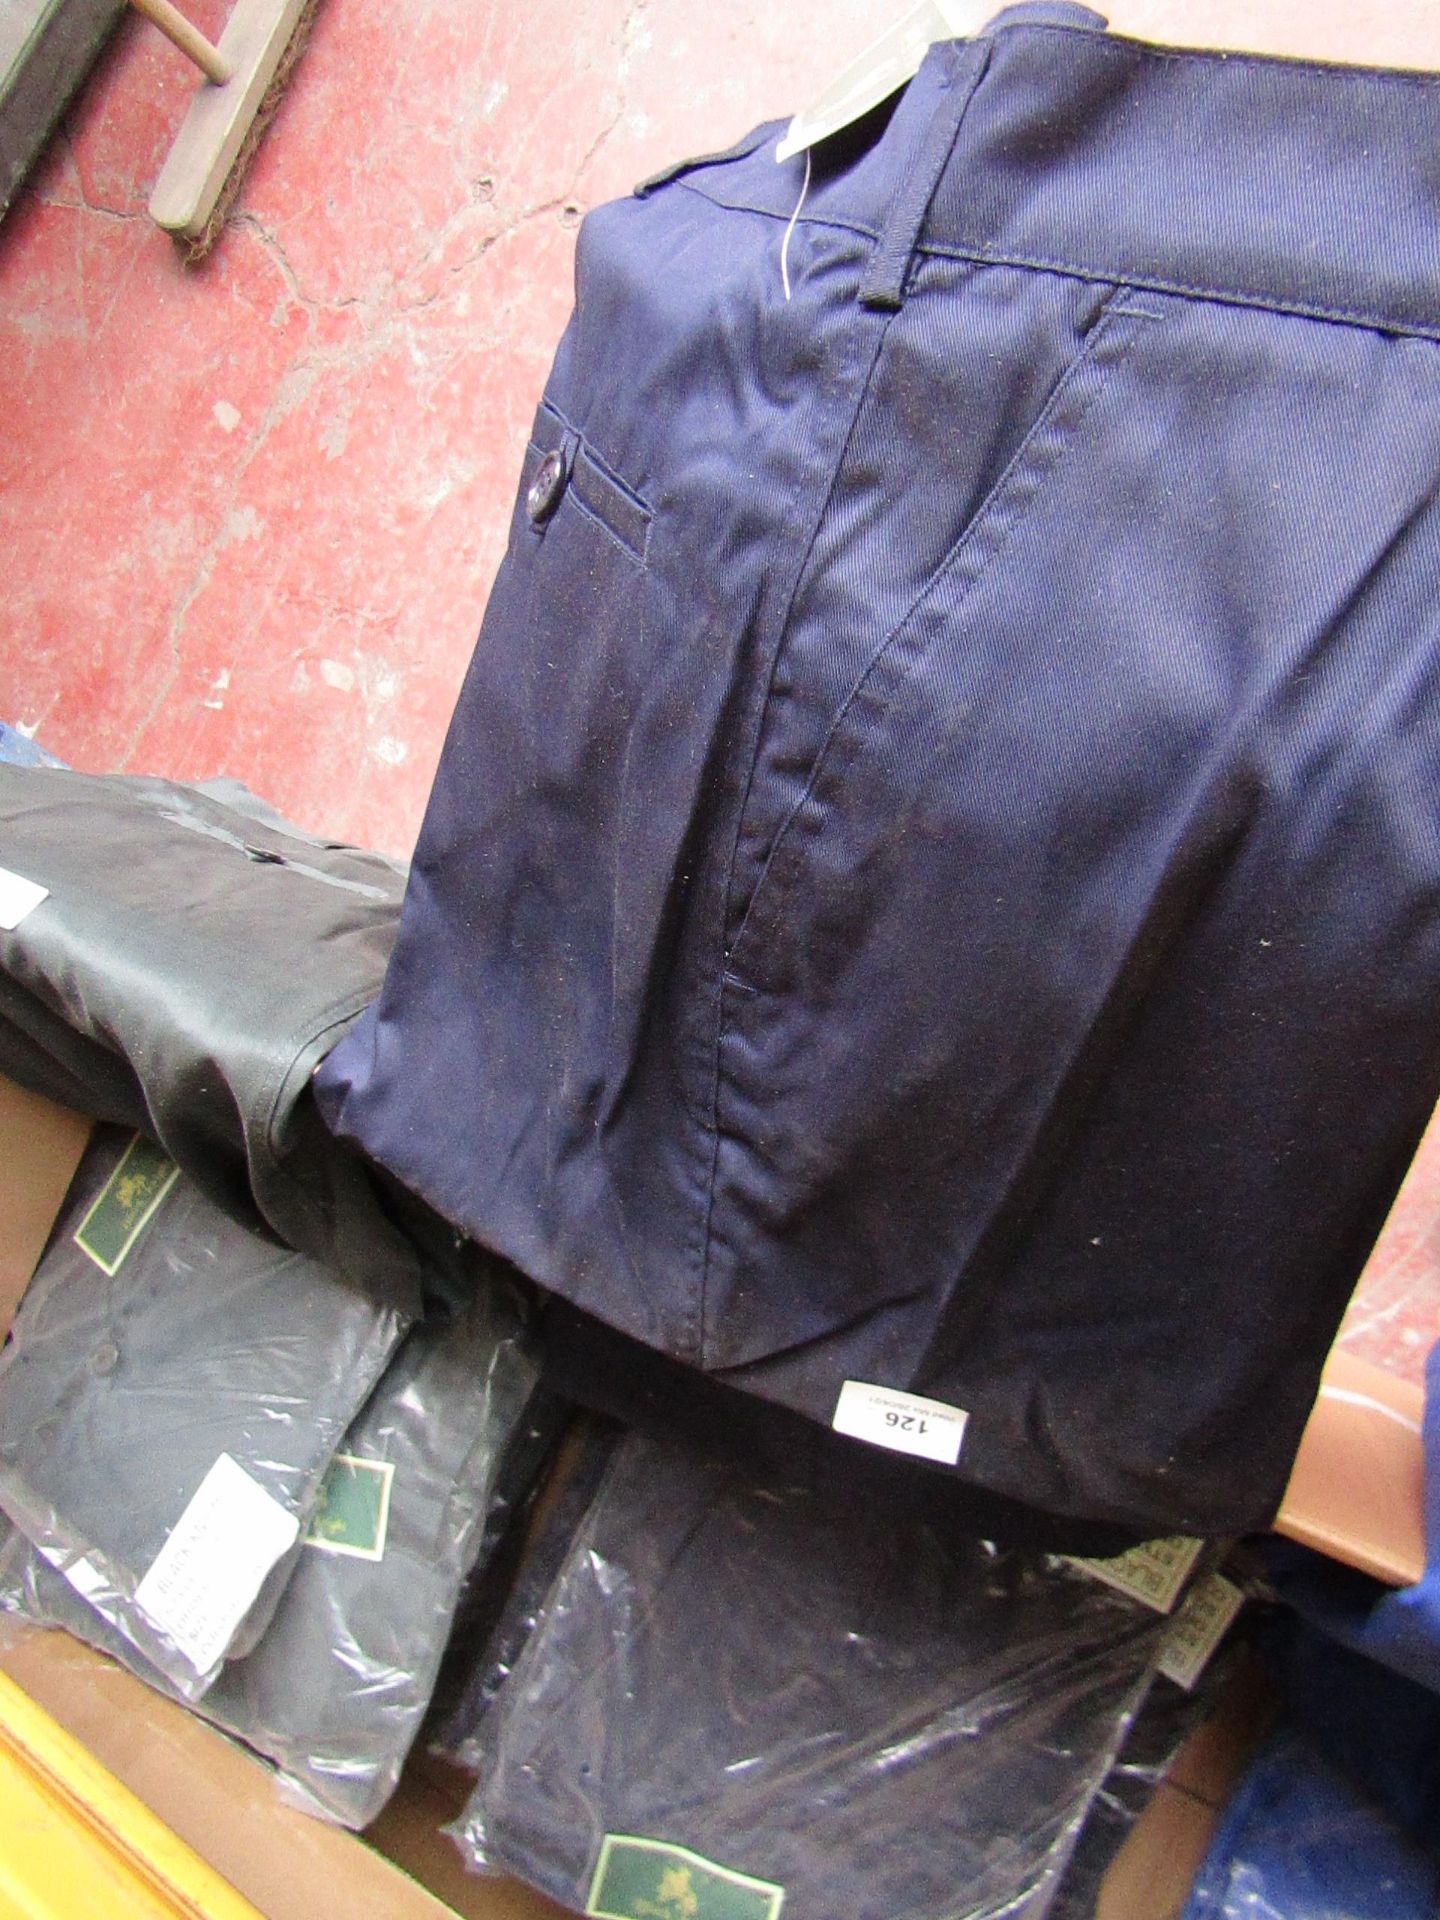 2x Black Knight - Work trousers - Navy - Size 42 - New & Packaged.